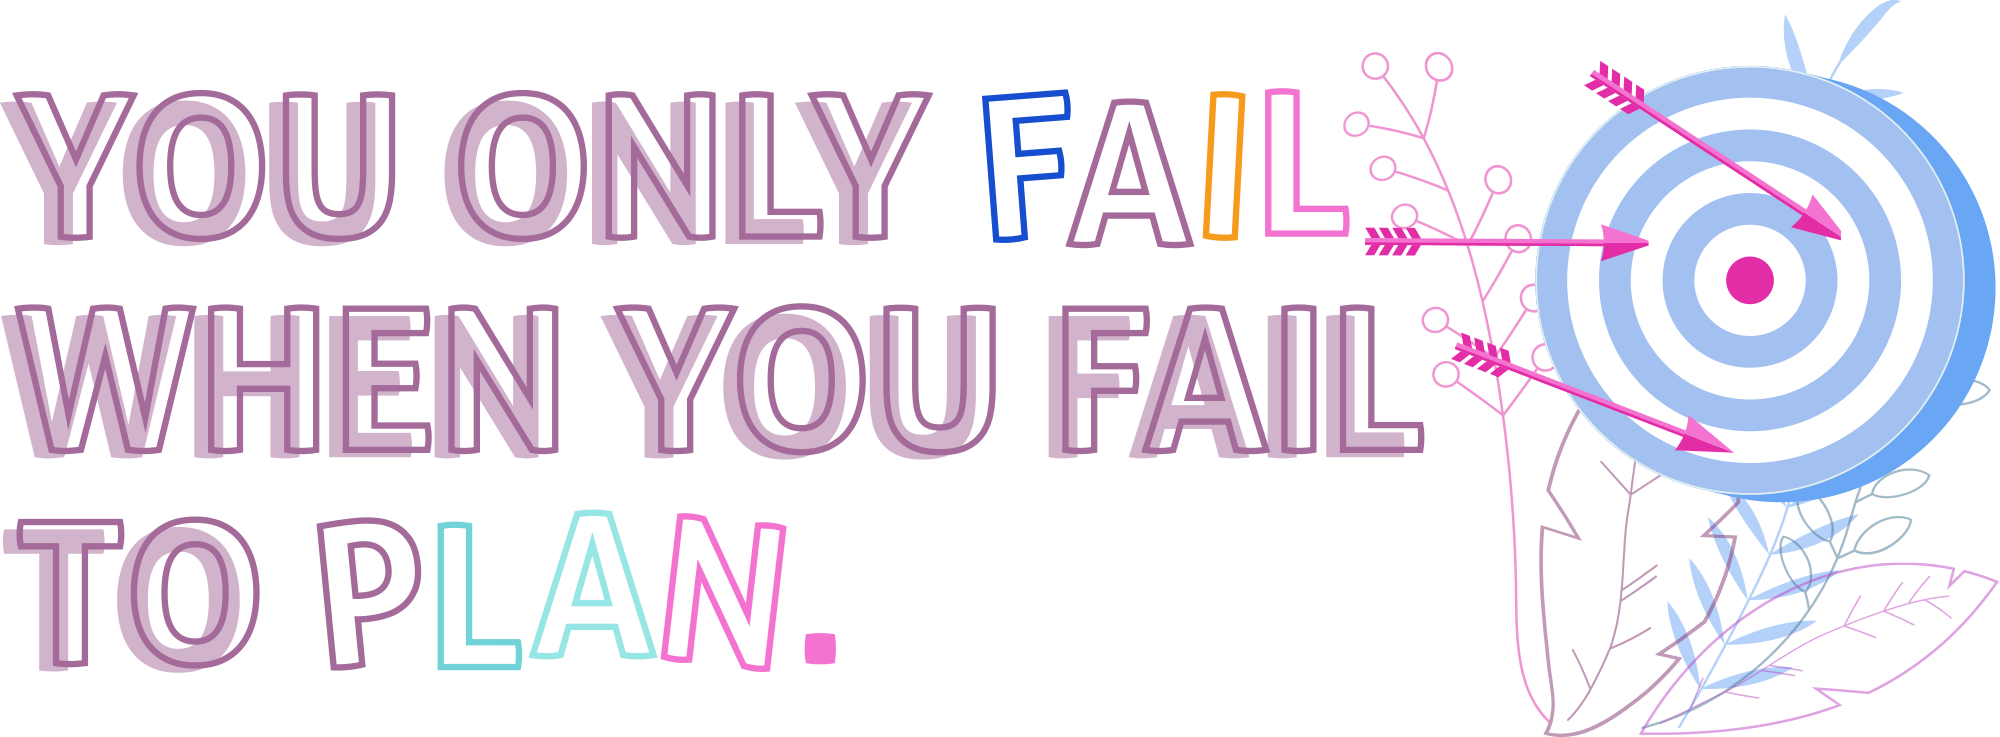 You only fail when you fall to plan.